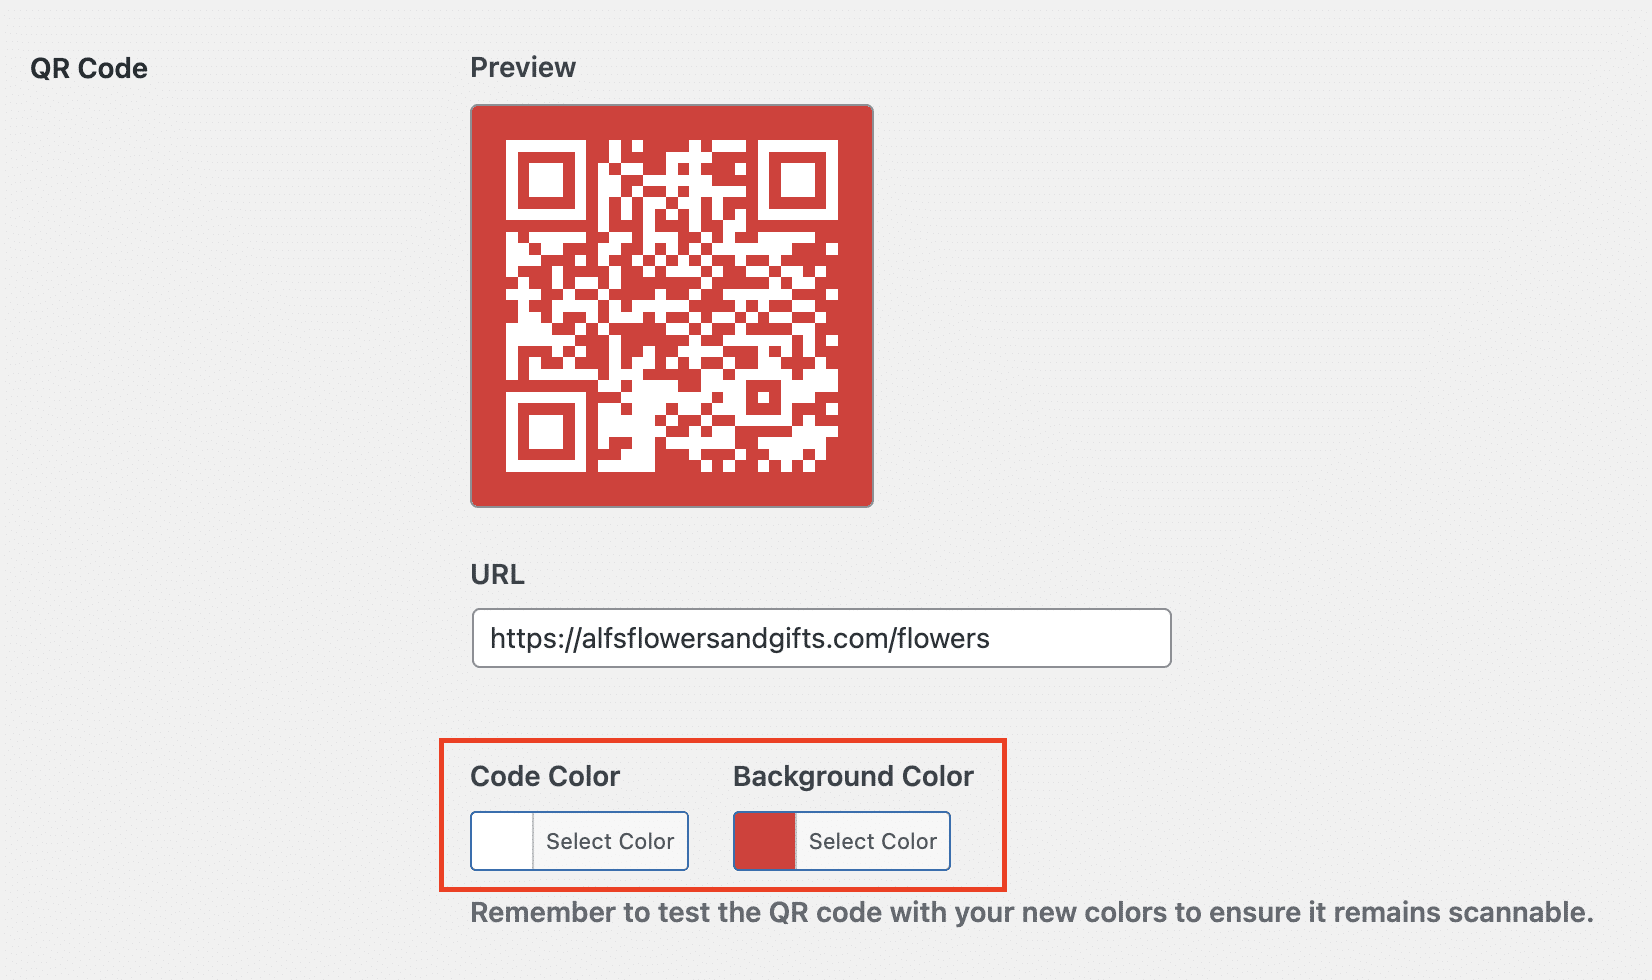 change color to your QR